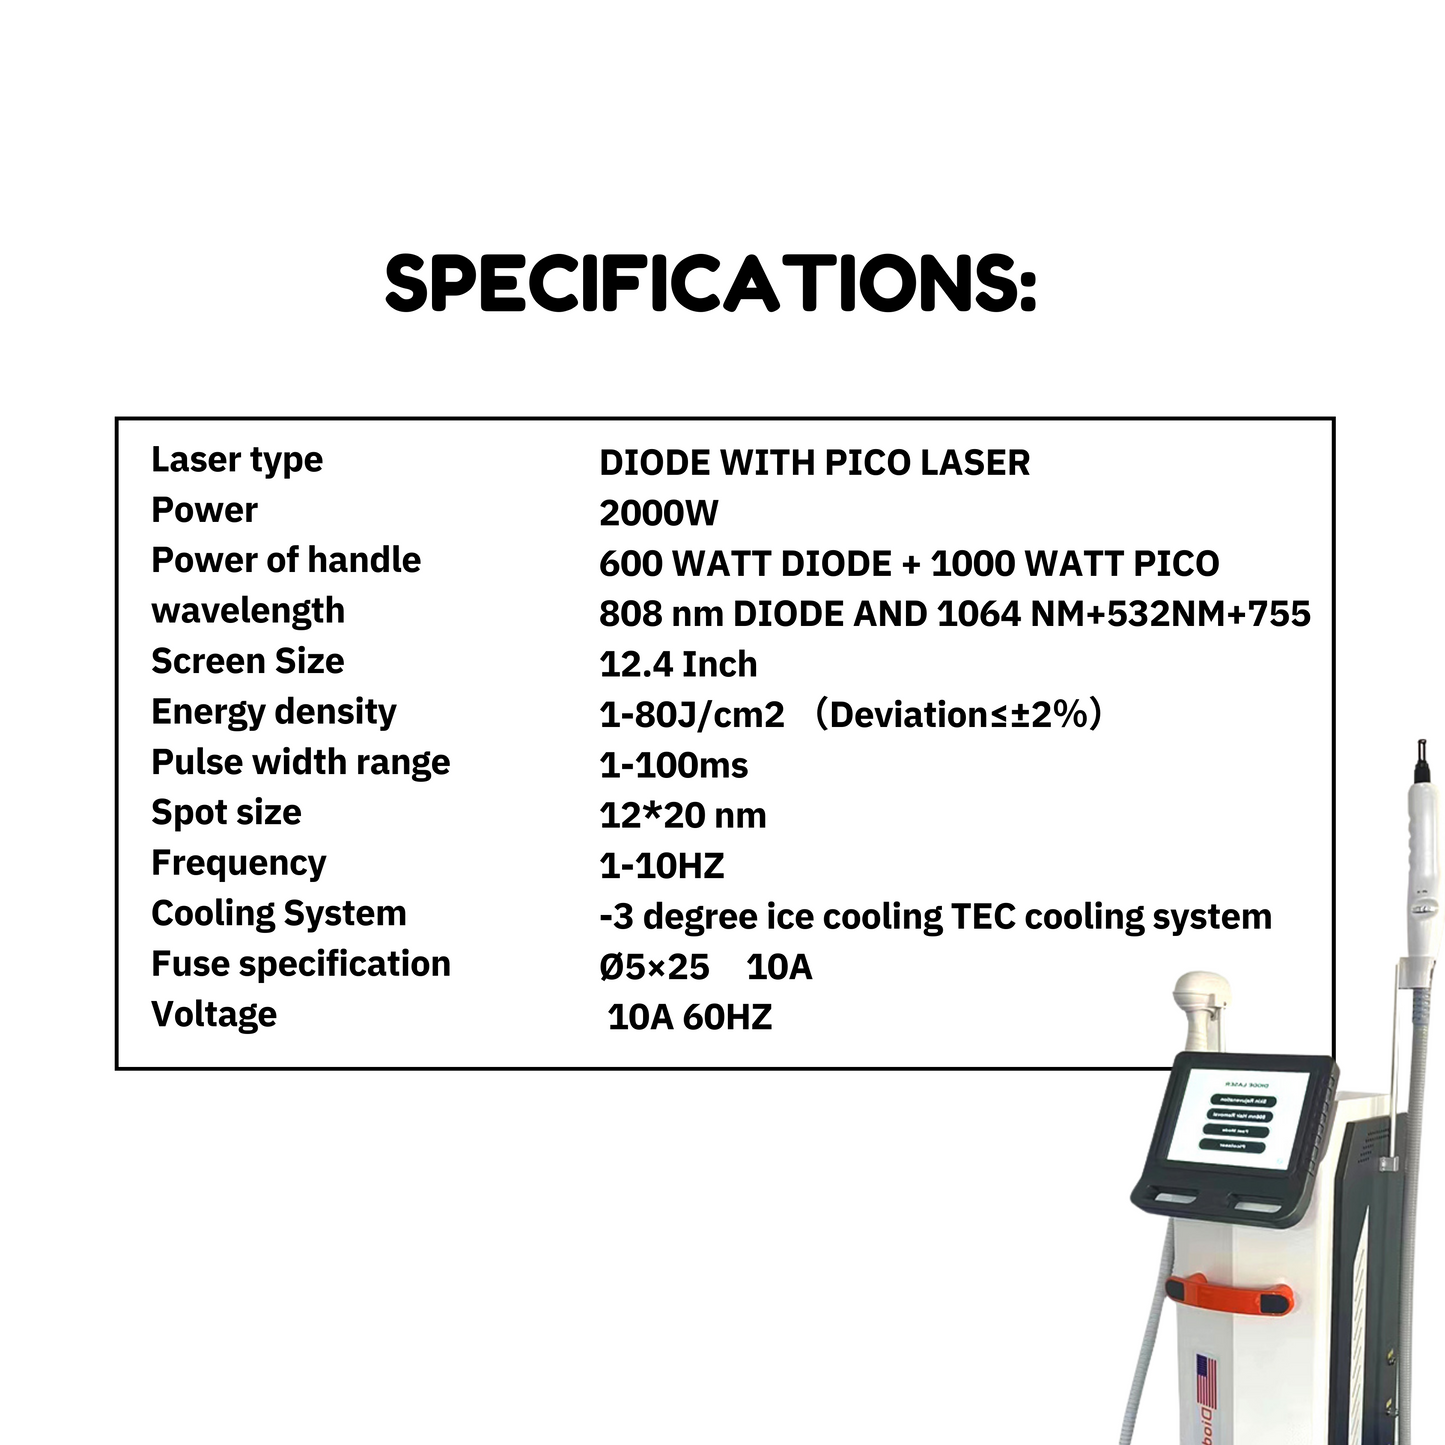 Diode with Pico Laser | Diode + Pico Laser | 2000 Watt Triple Wave Diode Laser | CE Approved | 2000 Watt QSwitch NdYAG Laser